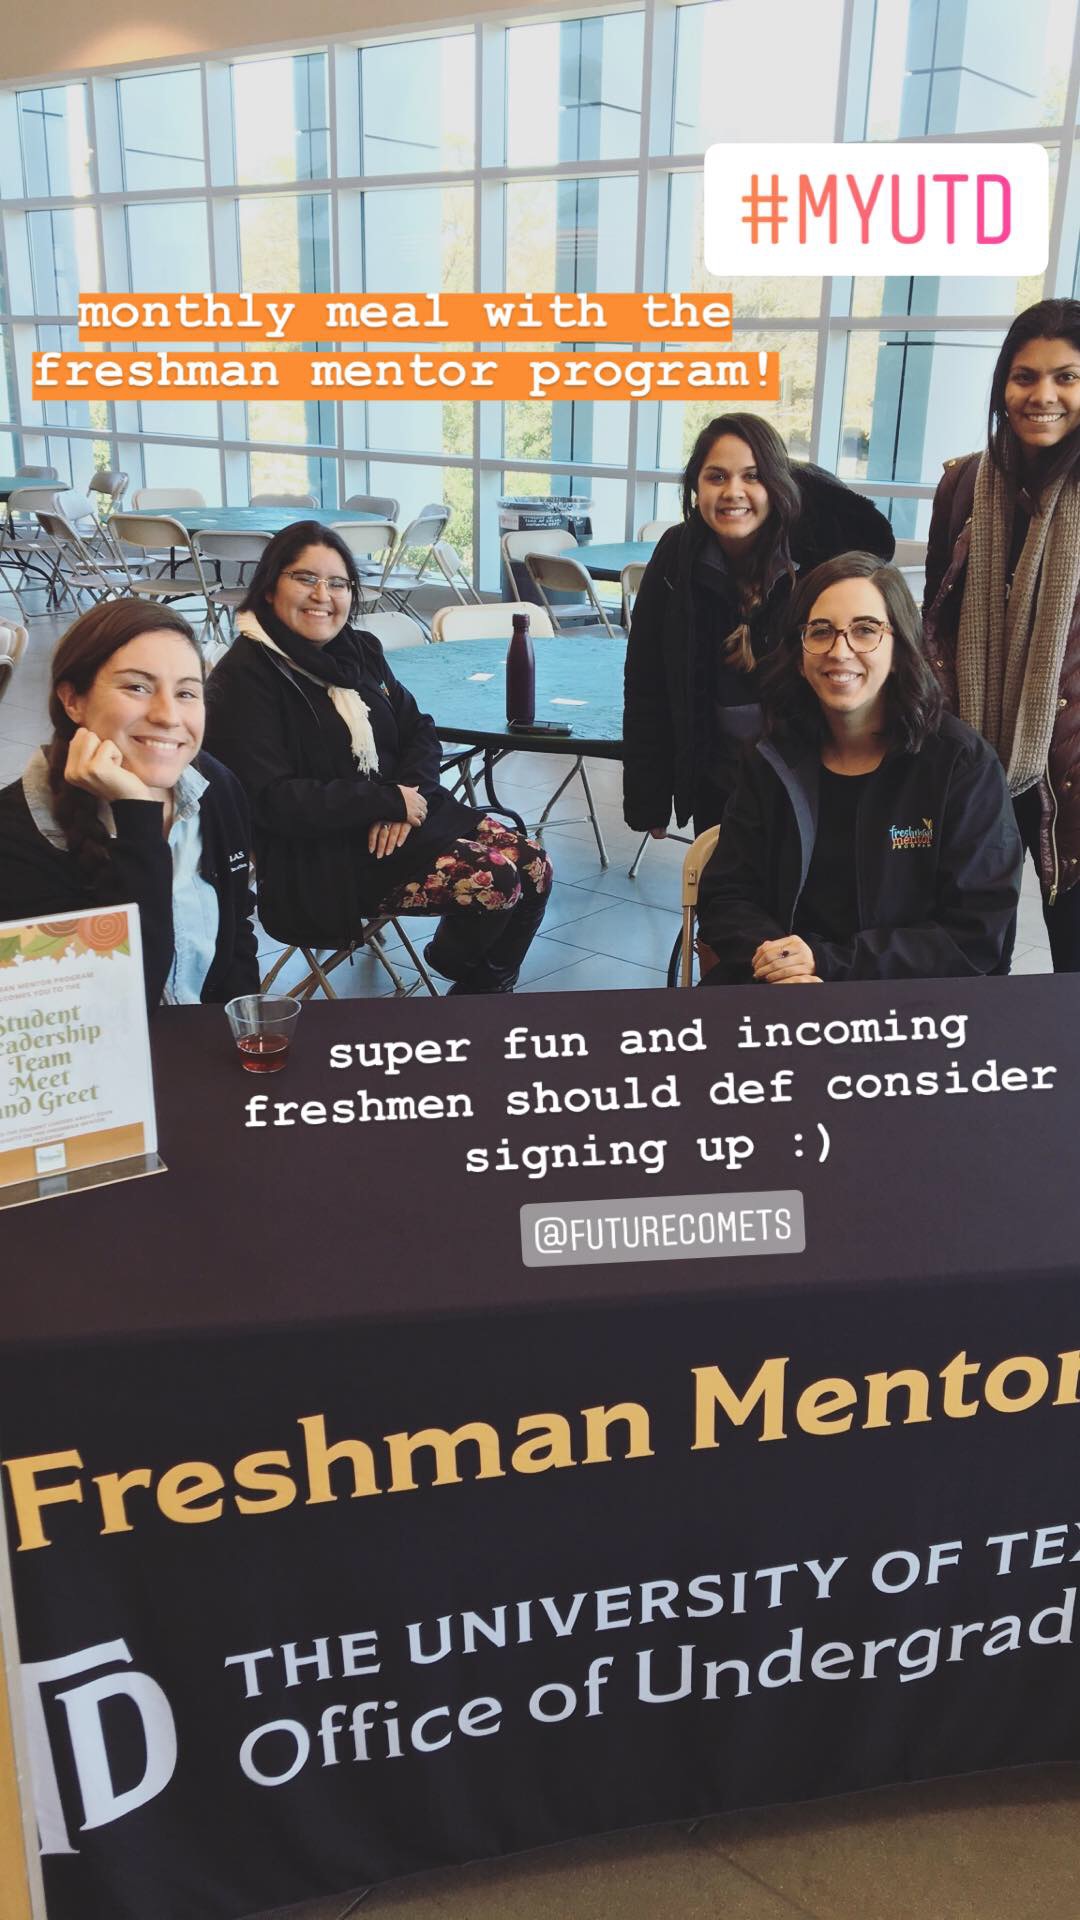 Five students gathered around a table with a tablecloth that reads, Freshman Mentor.